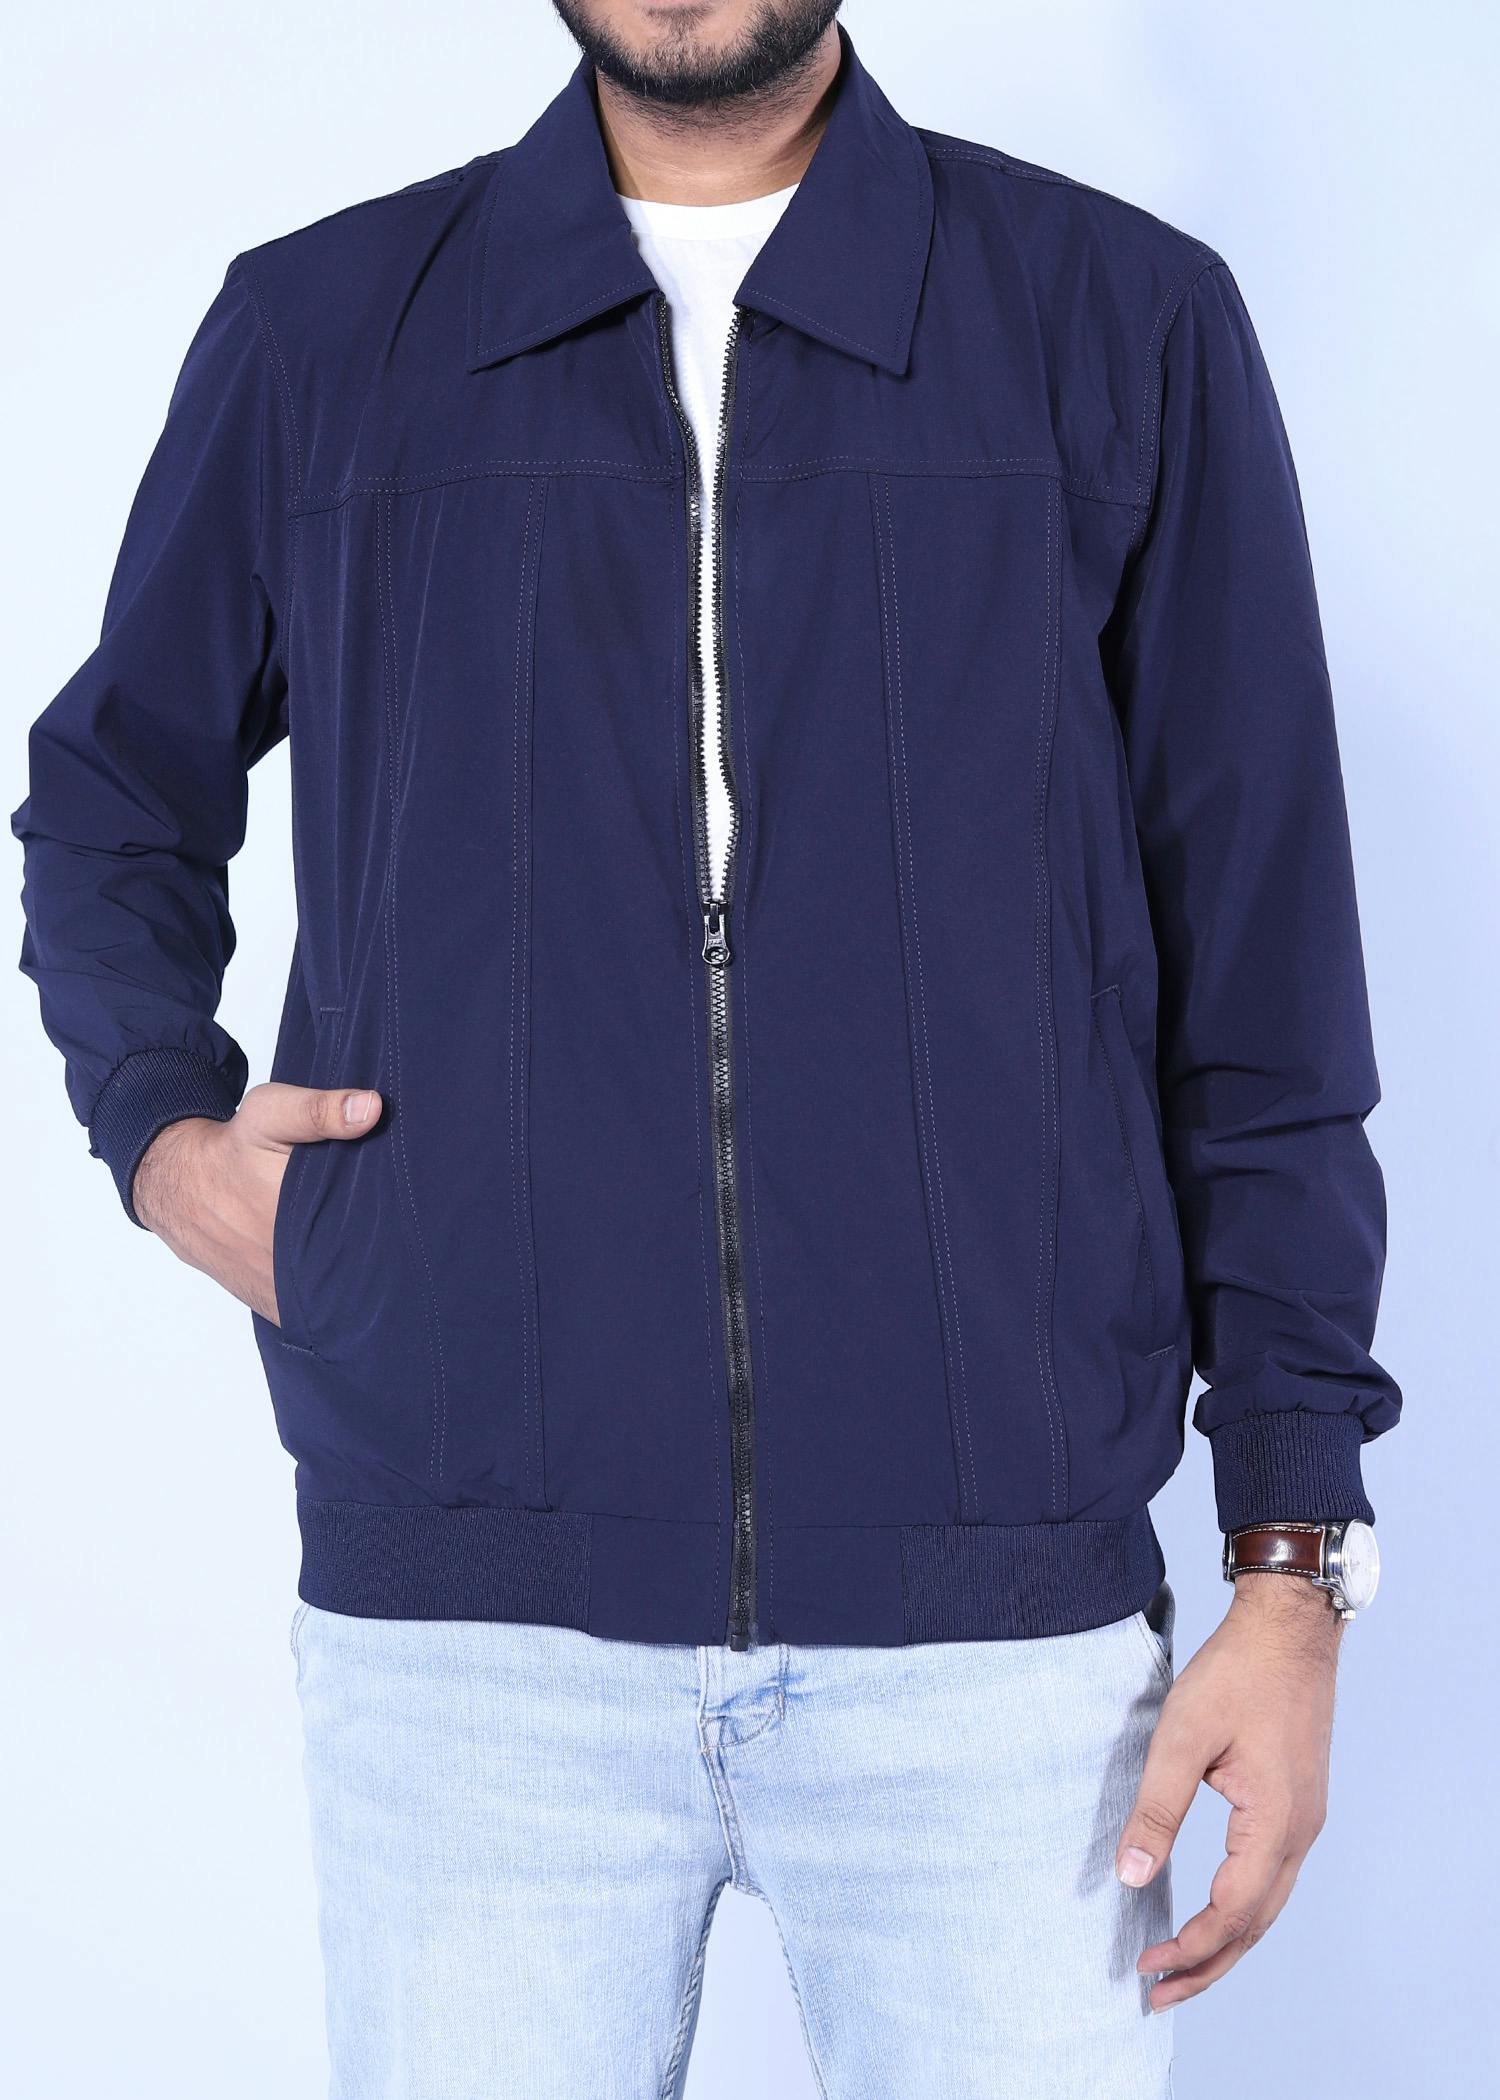 booby ii jacket navy color half front view